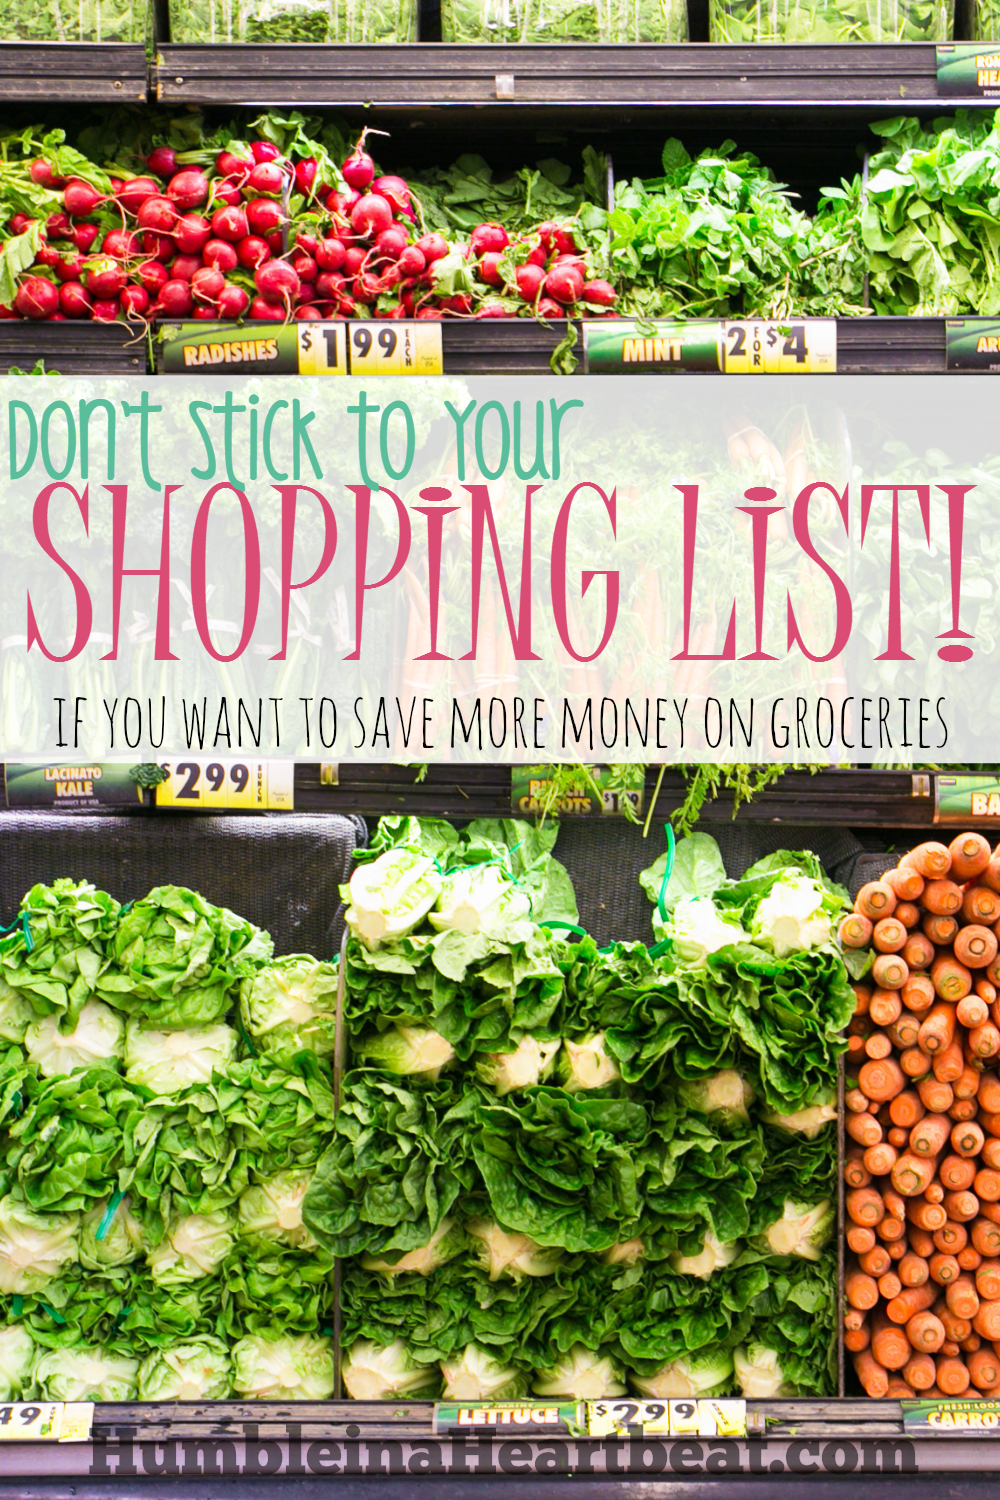 If you want to save more money on groceries, consider being more flexible with your shopping list. Deviate a little from what you need to buy and you can save more in the long run.